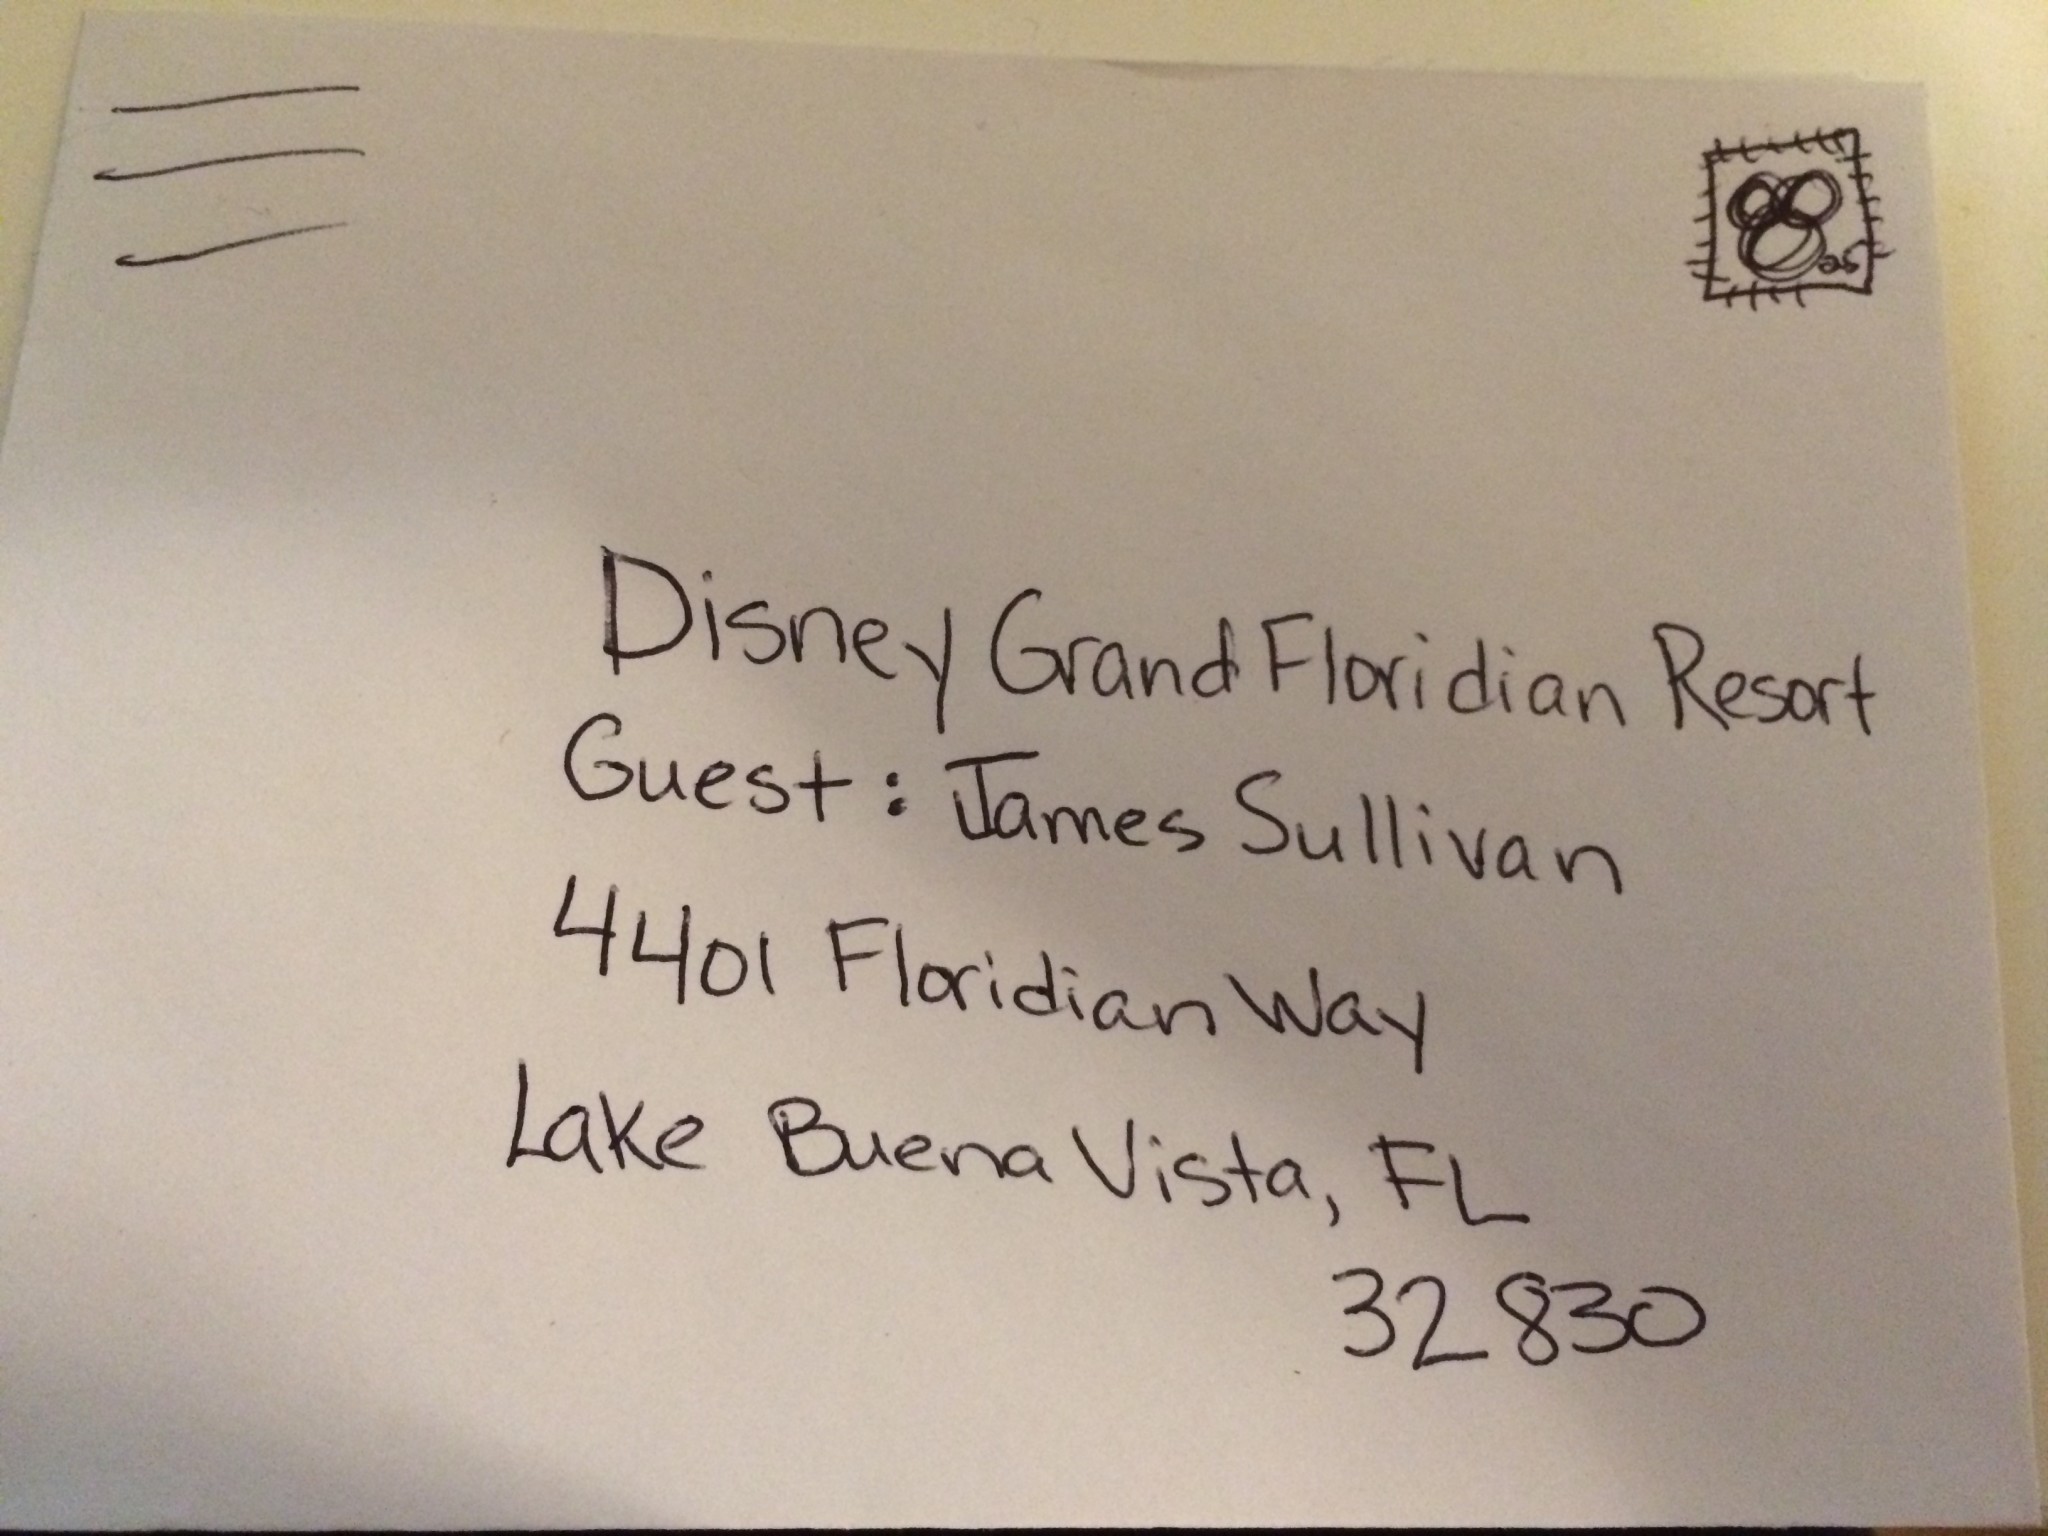 Shipping Items to a Disney World Resort